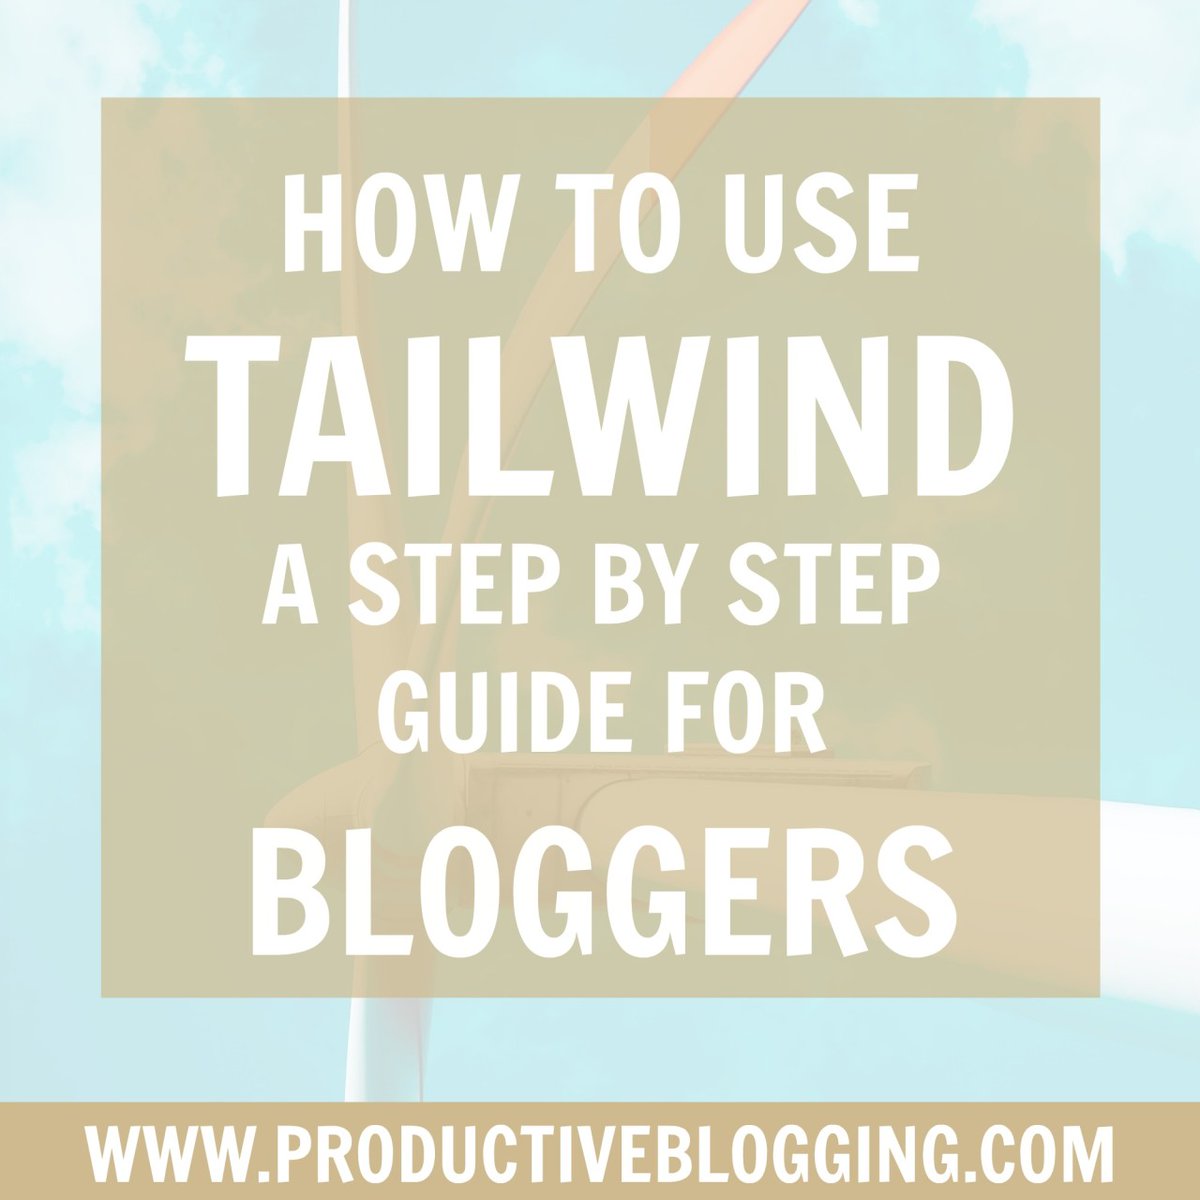 Who here uses @TailwindApp? How has it helped you? Since using #Tailwind, I have seen a dramatic increase in my blog traffic from Pinterest AND it has helped me grow my email list - PLUS it saves me a ton of time each week! FIND OUT HOW >>> bit.ly/2vdEL71